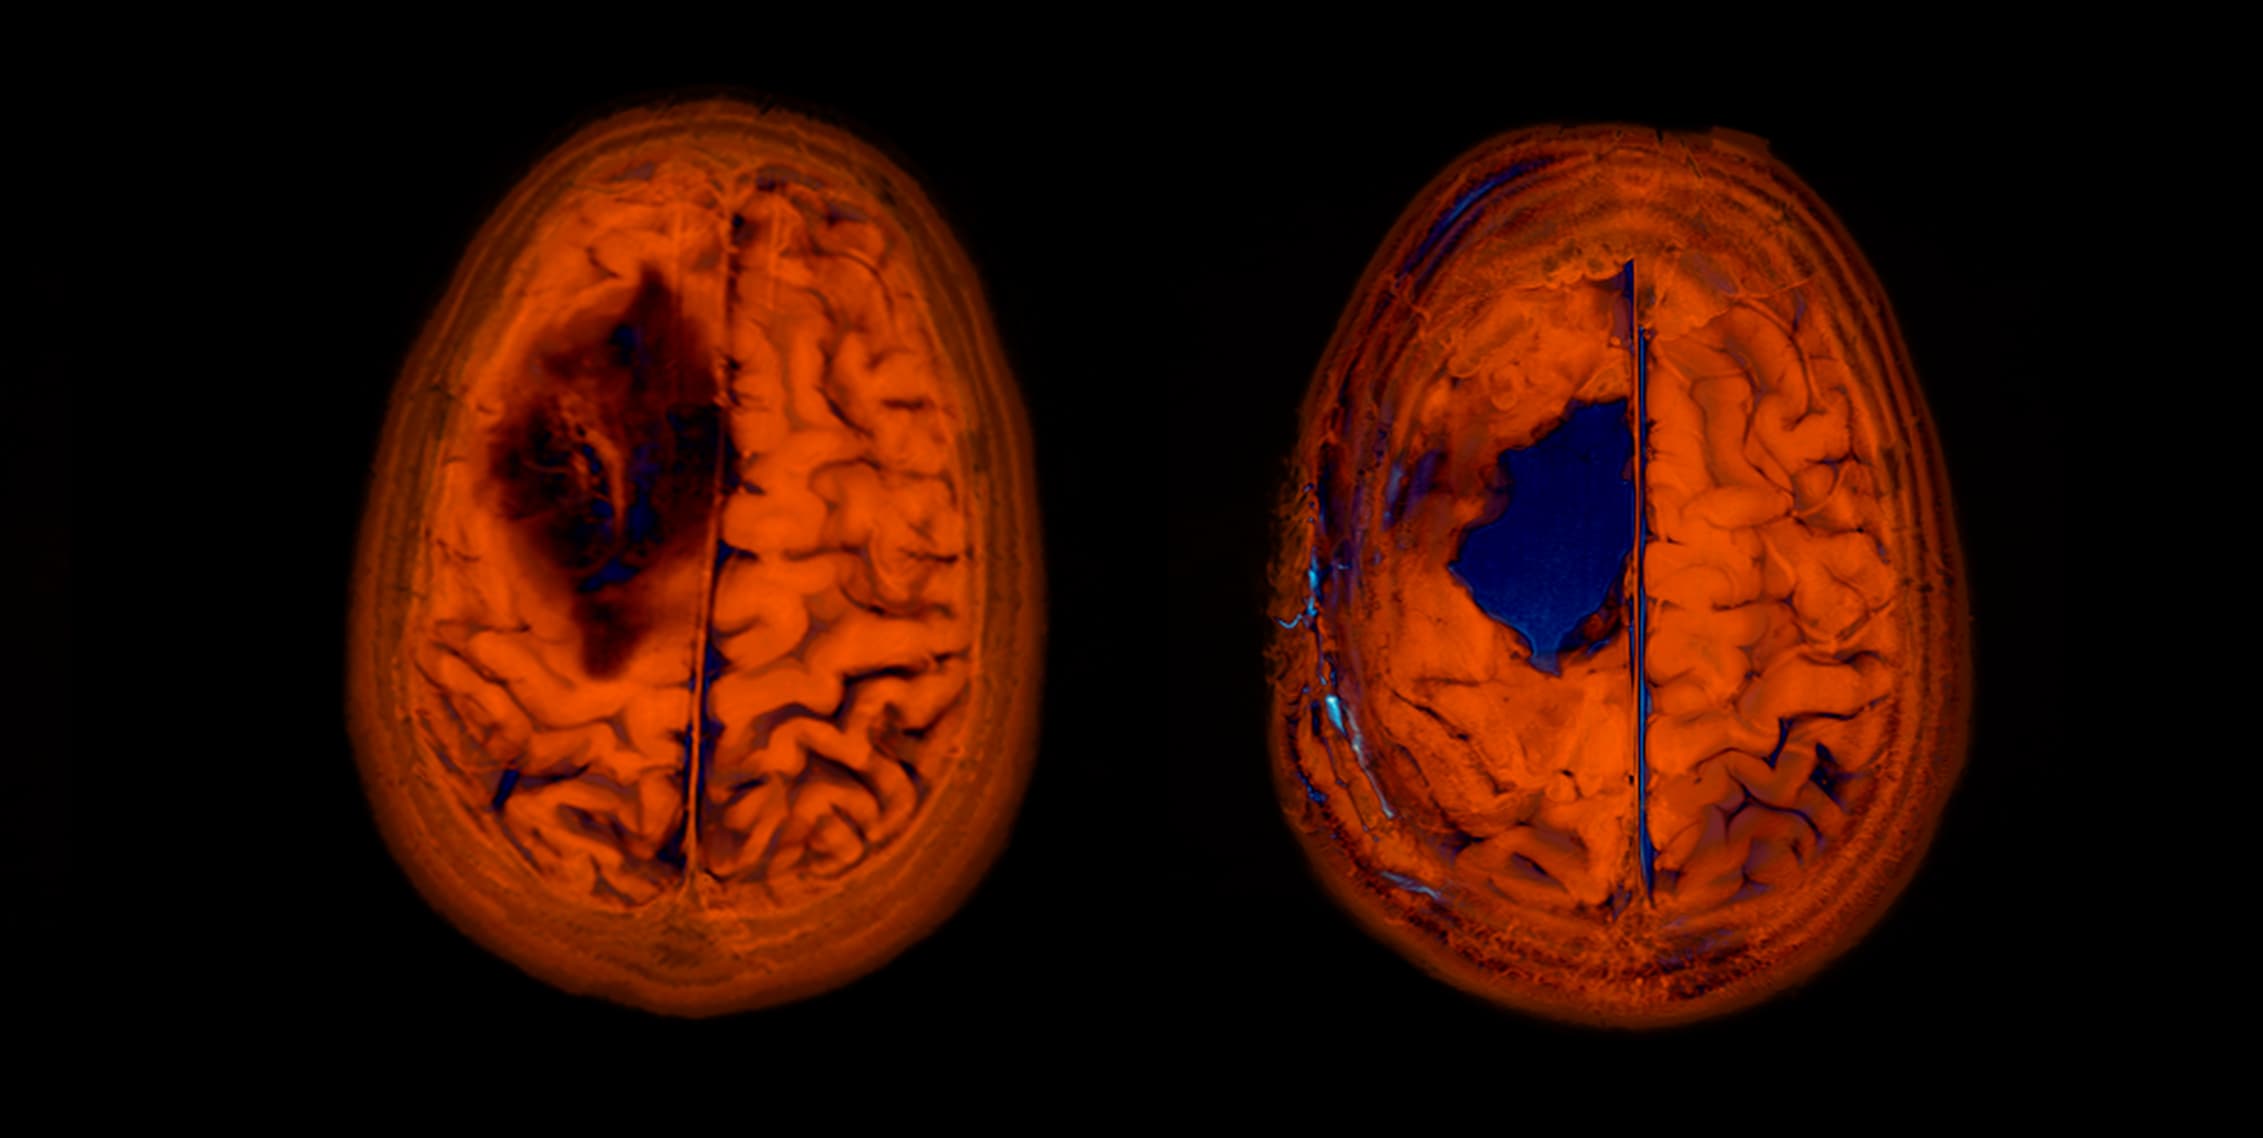 Comparing imaging before / after for my brain